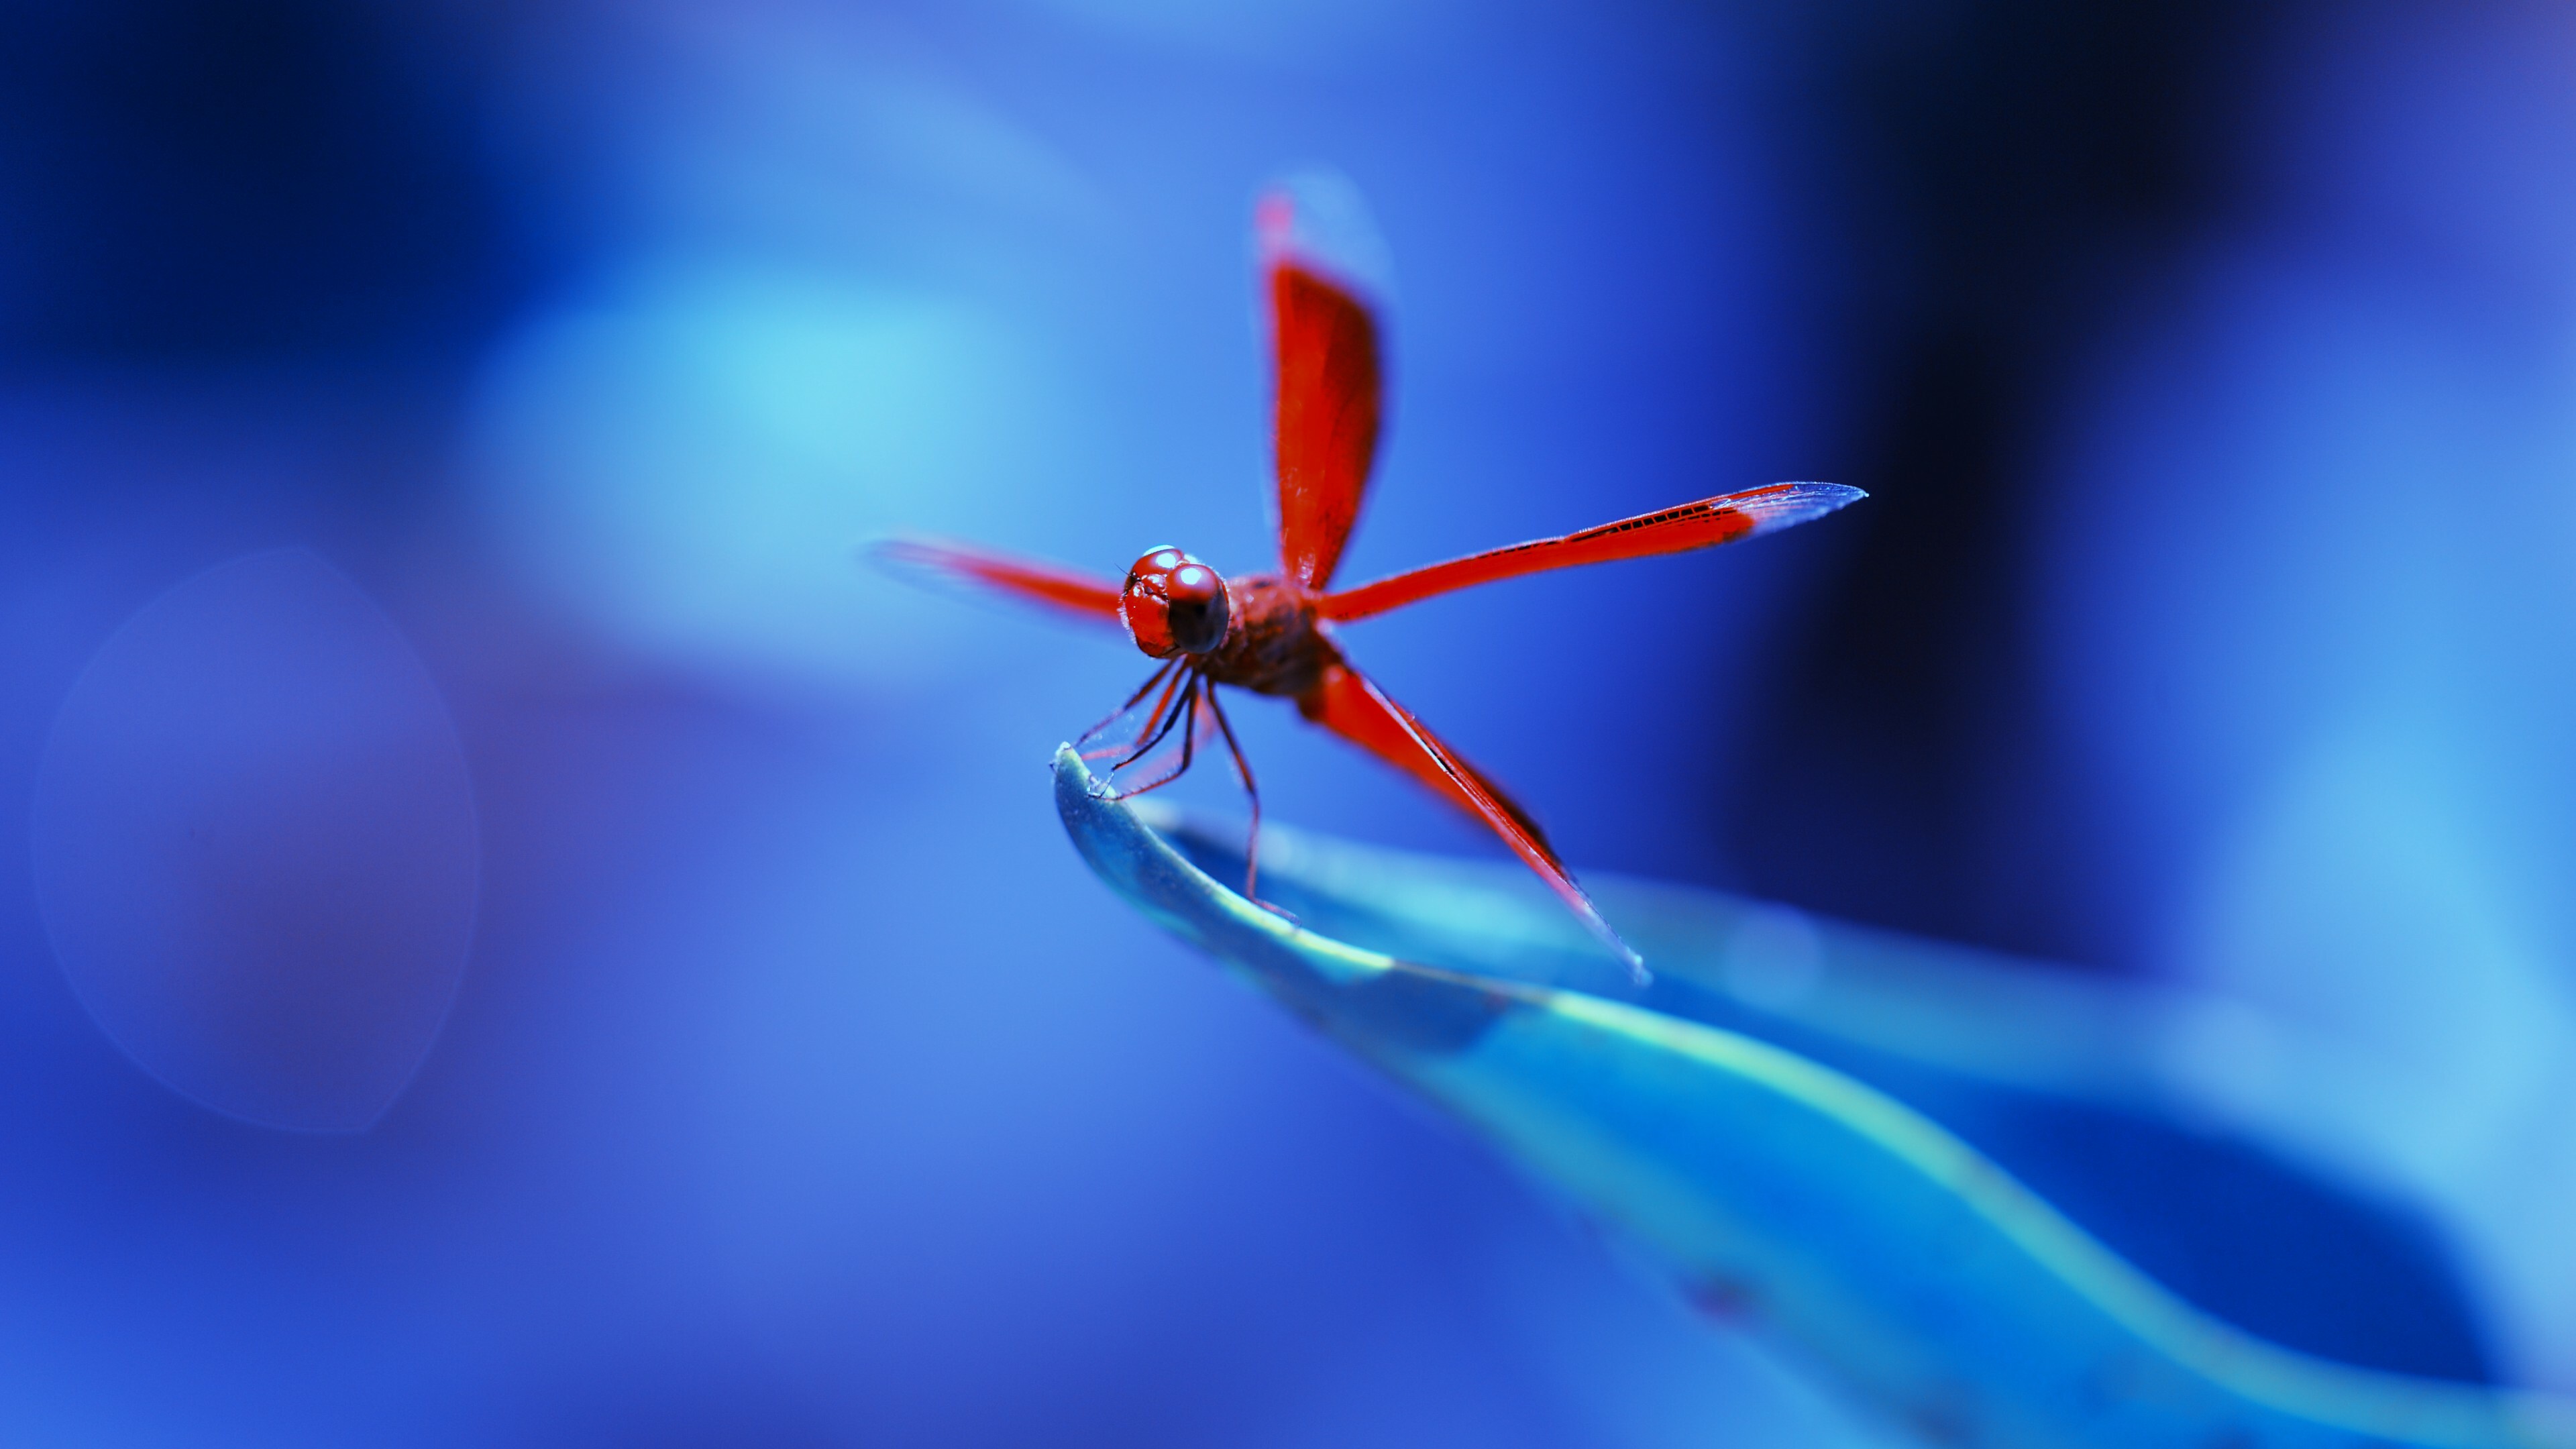 Dragonfly: Insects, Loss of wetland habitat threatens populations around the world. 3840x2160 4K Wallpaper.